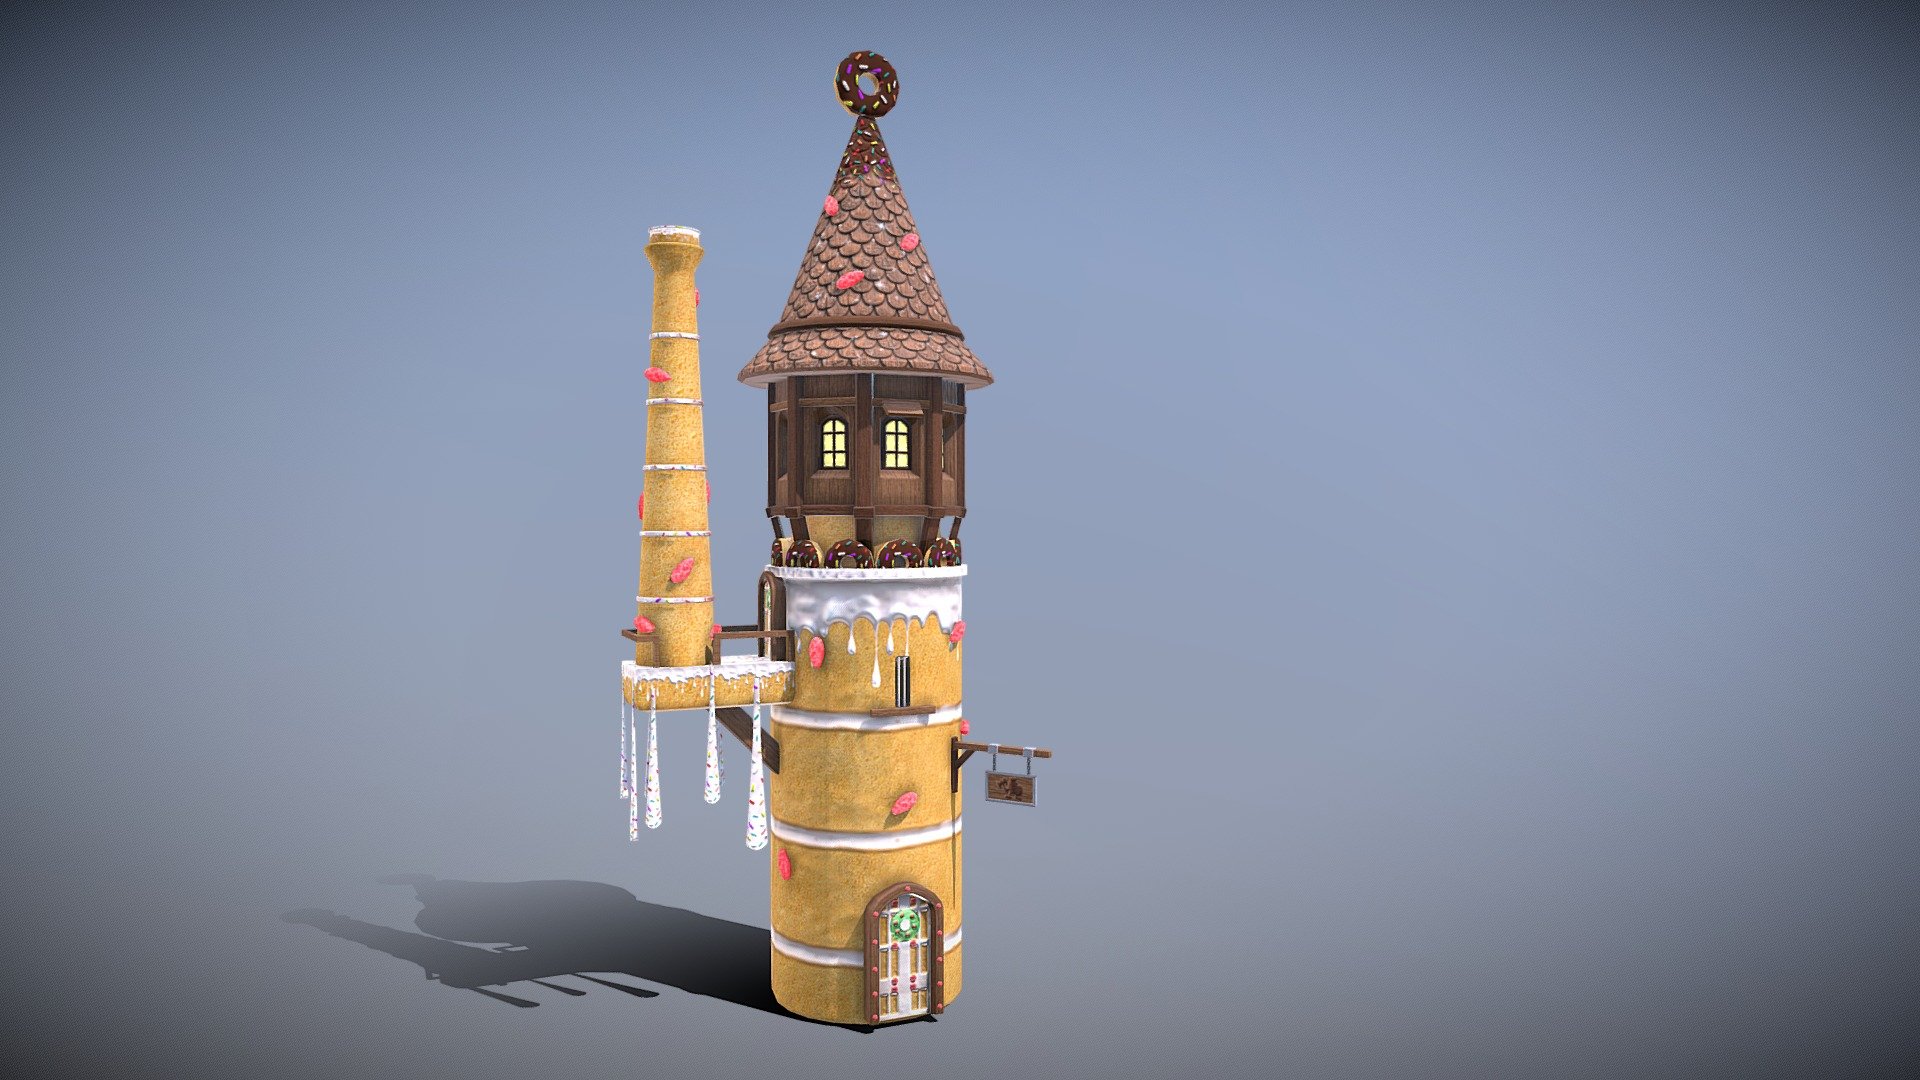 Hello guys! This is a Cake Tower that is a scenario piece from the Food War TD game. Follow my social medias to know more about the development of Food War TD!

https://www.facebook.com/williammarquesproductions/?view_public_for=2012017748921767

https://www.artstation.com/williamornelas

https://www.instagram.com/wmarques_art/?hl=pt - Cake Tower - Buy Royalty Free 3D model by williamornelas 3d model